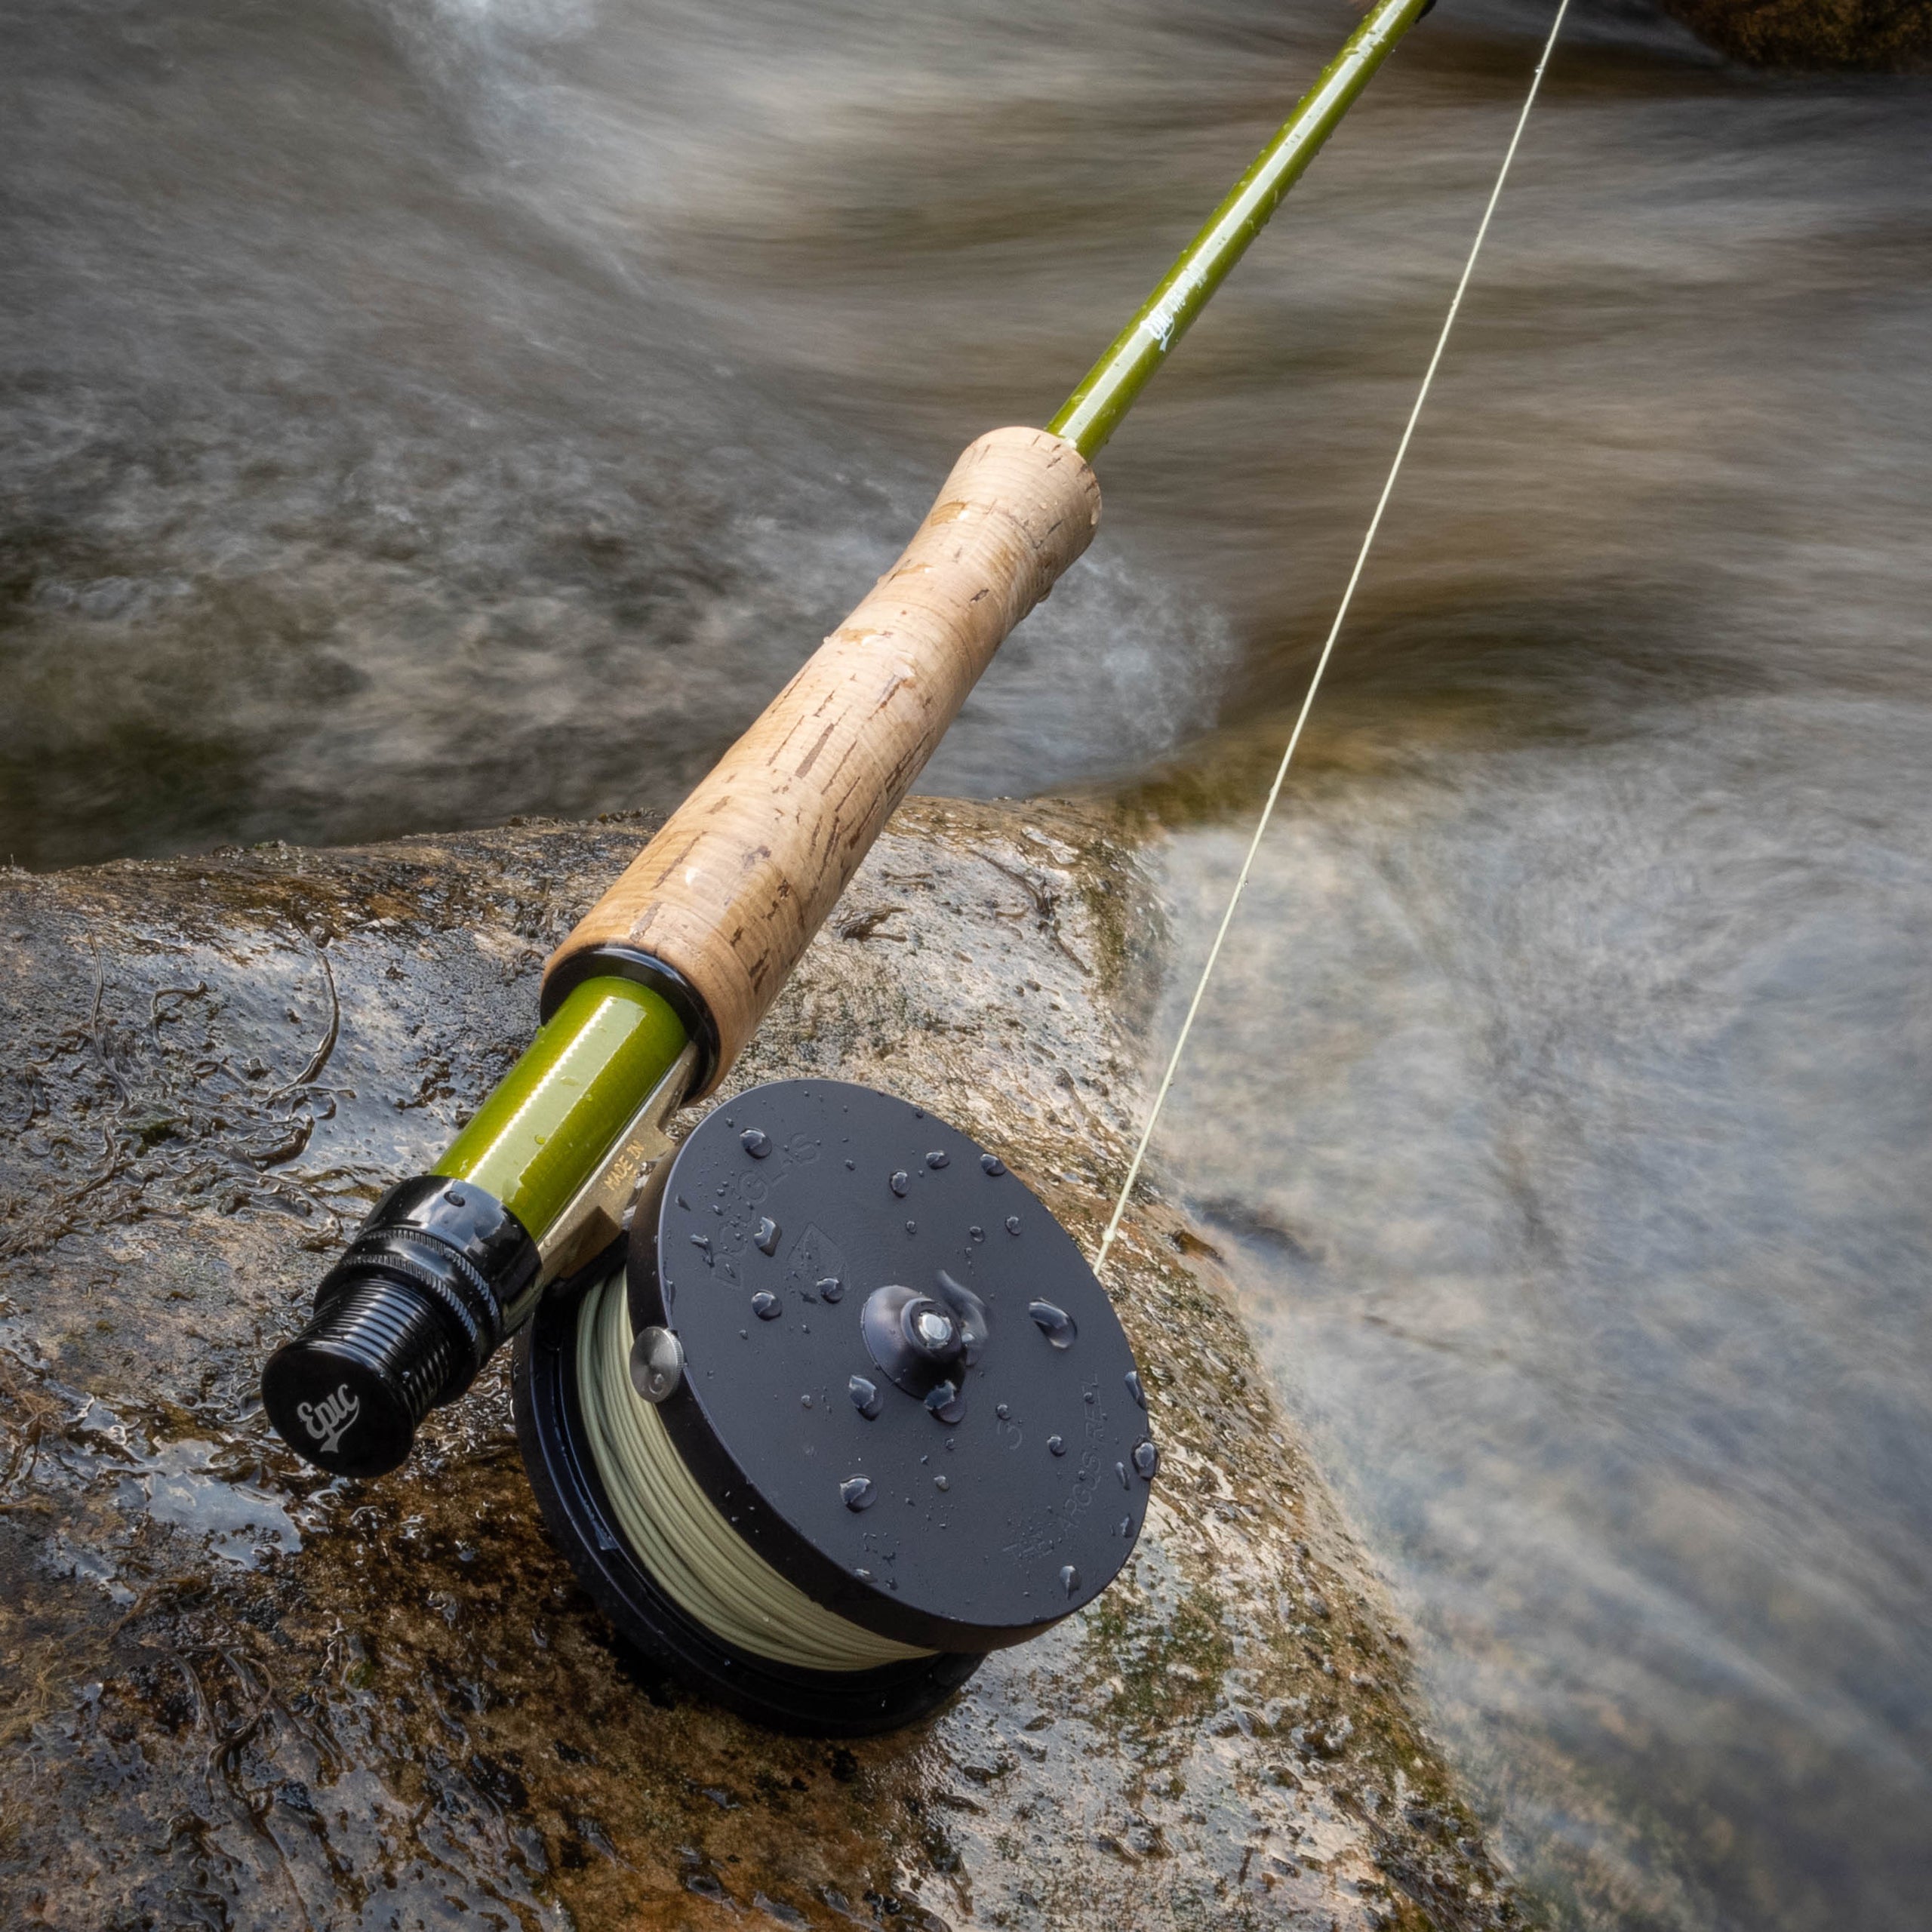 406 Fly Line - Weight Forward. Made in the US by Scientific Anglers.